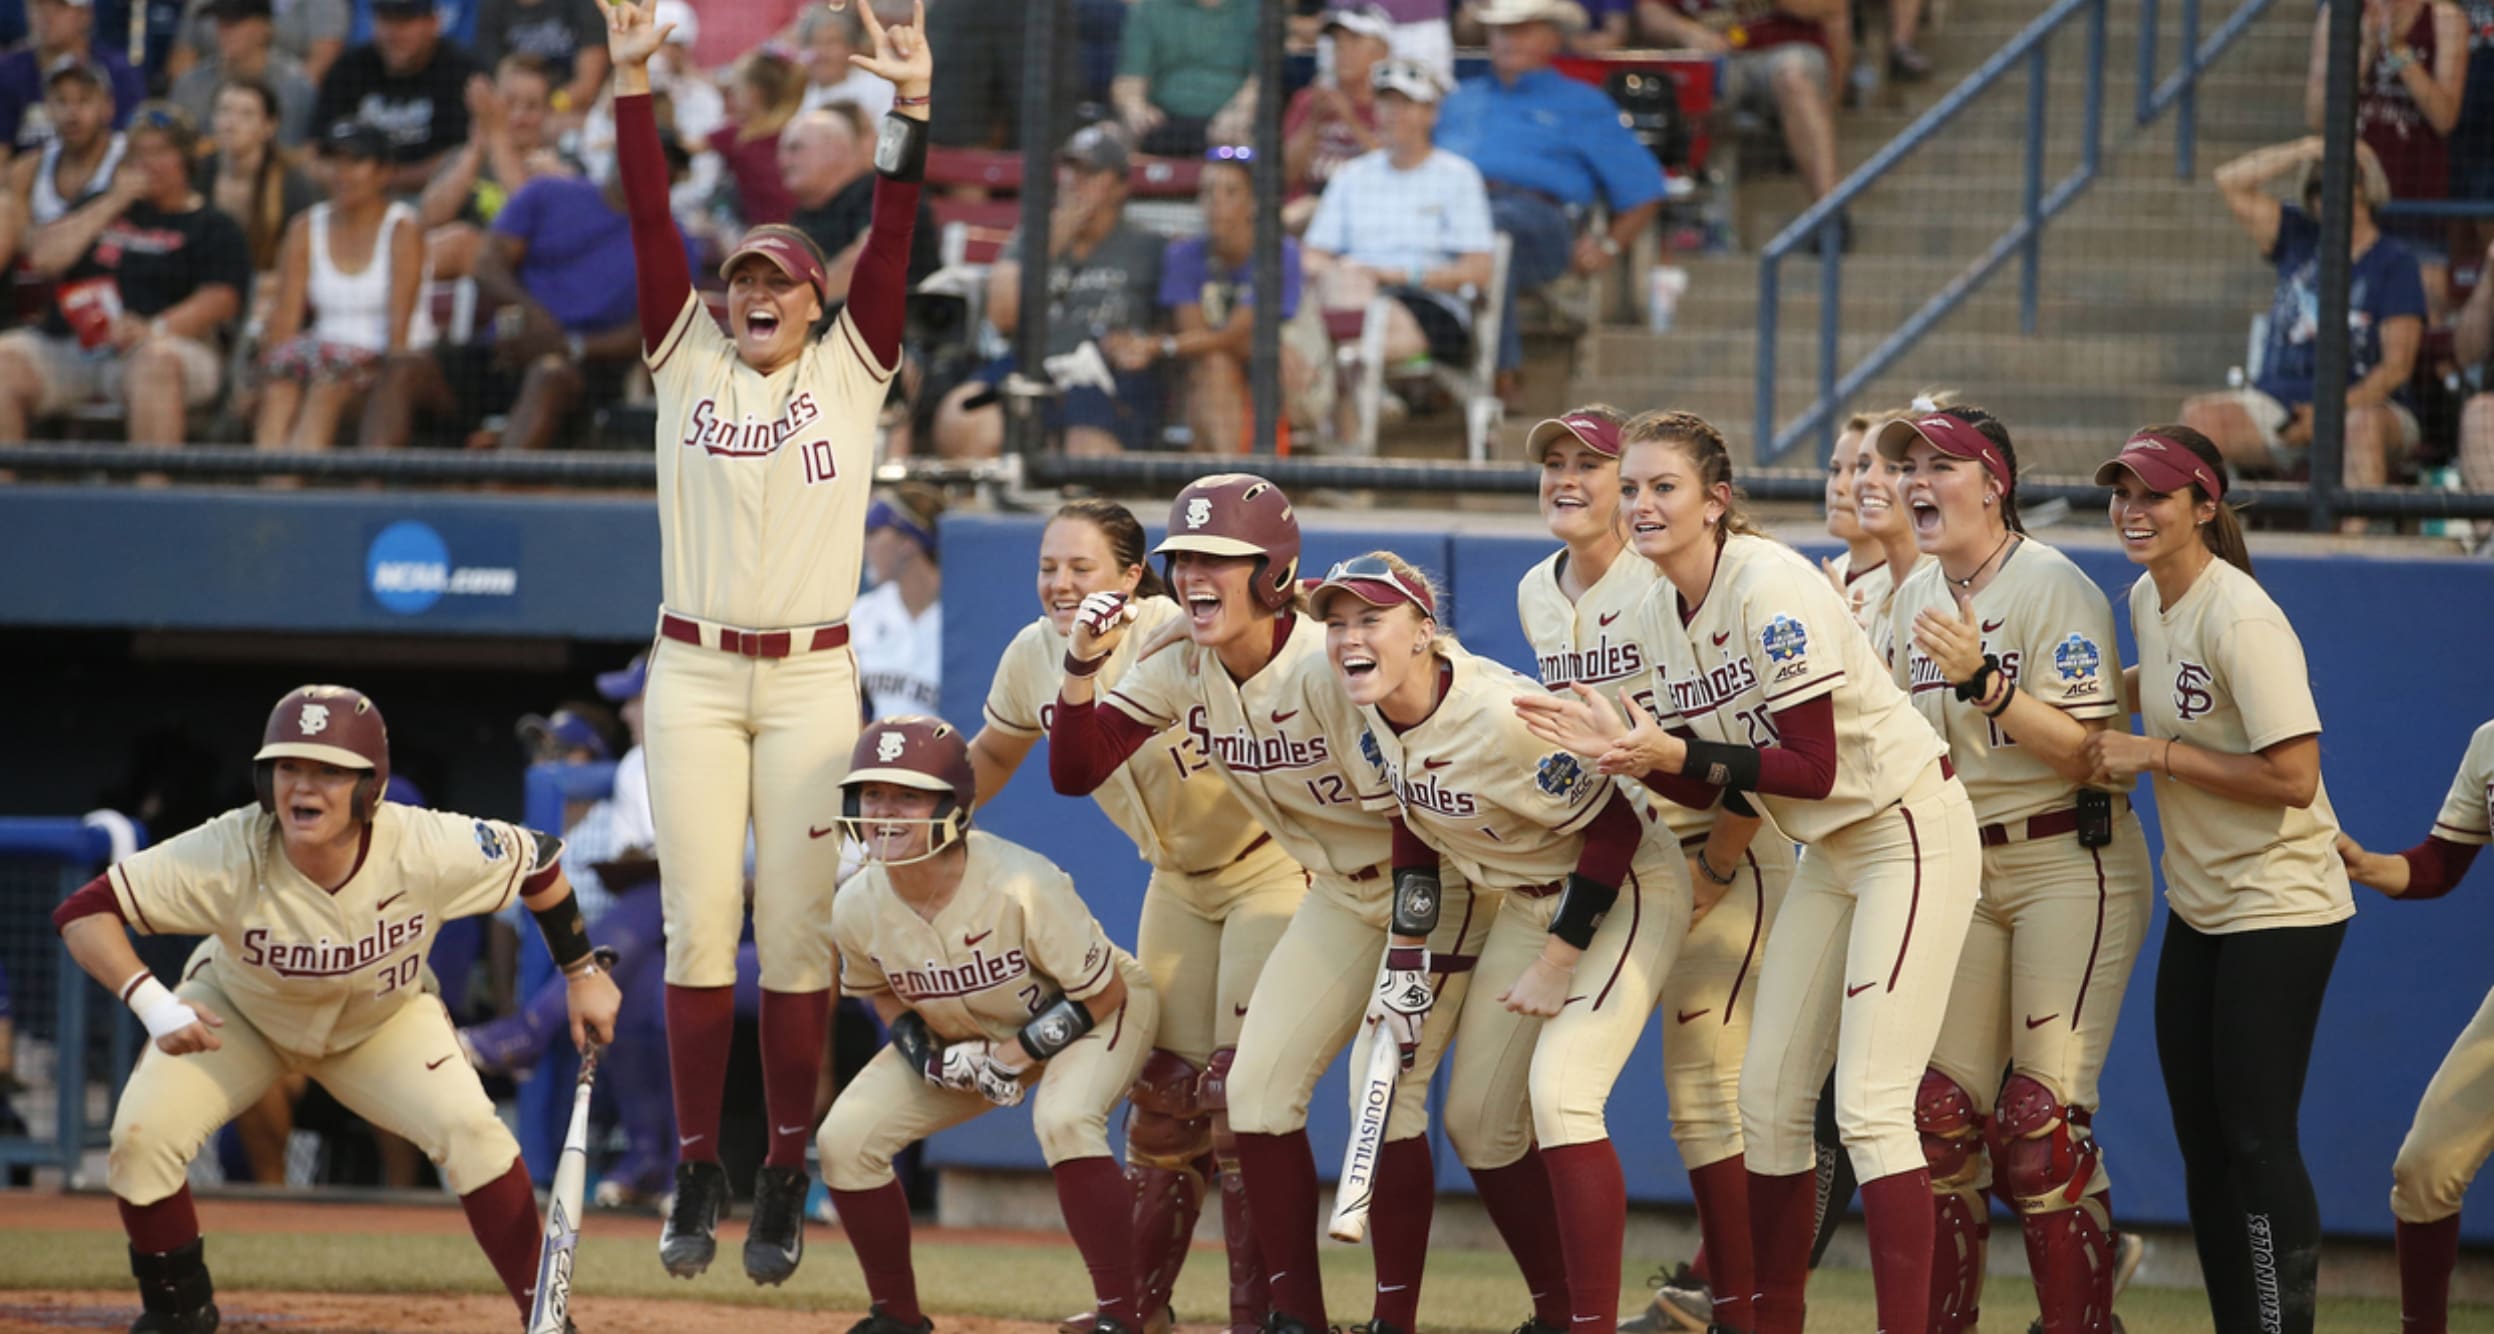 Softball Champs Baseball Logo - Florida State wins first WCWS in two-game sweep over Washington ...